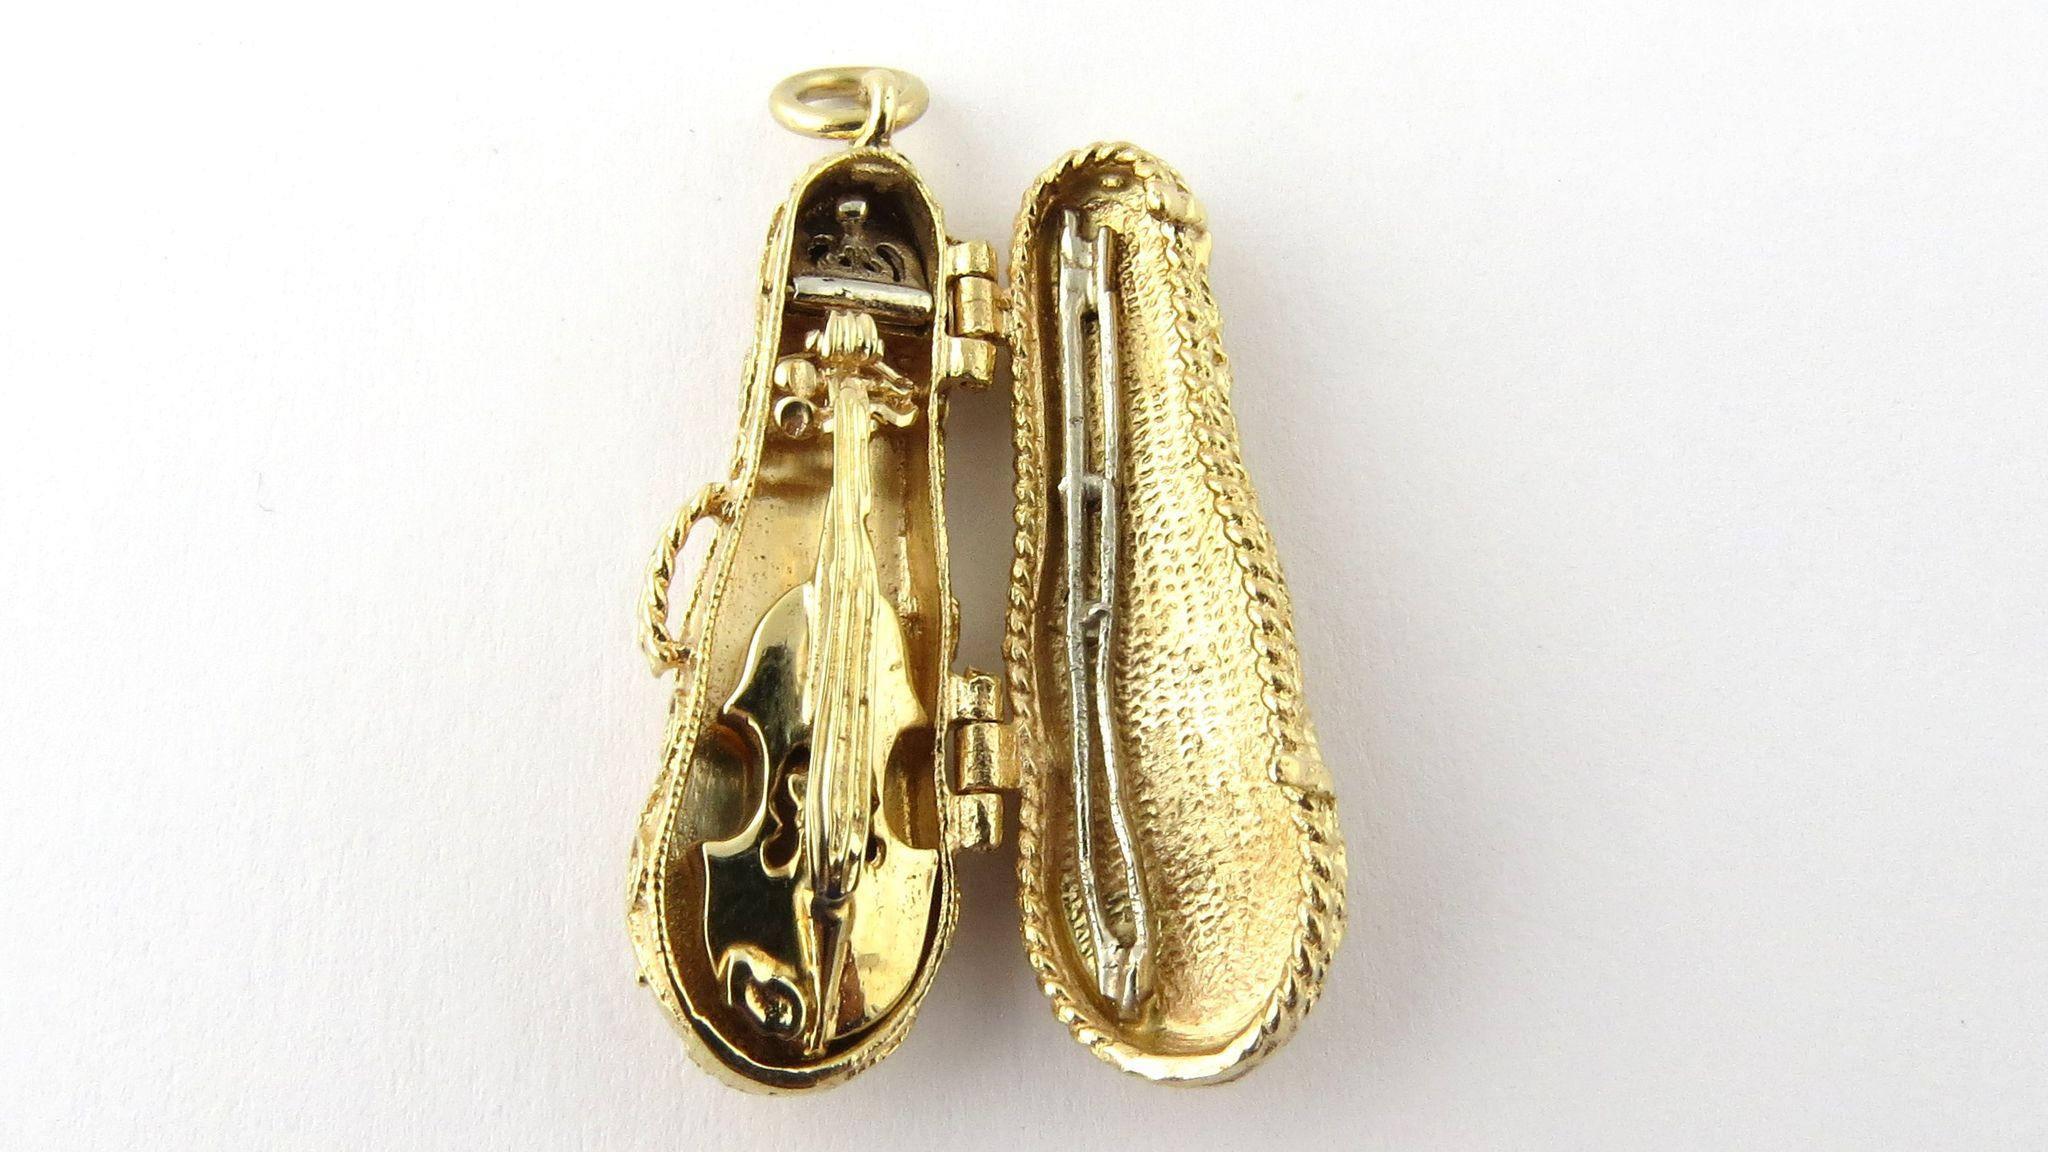 14 Karat Gold and Turquoise Violin Pendant or Charm in Violin Case with Bow 1